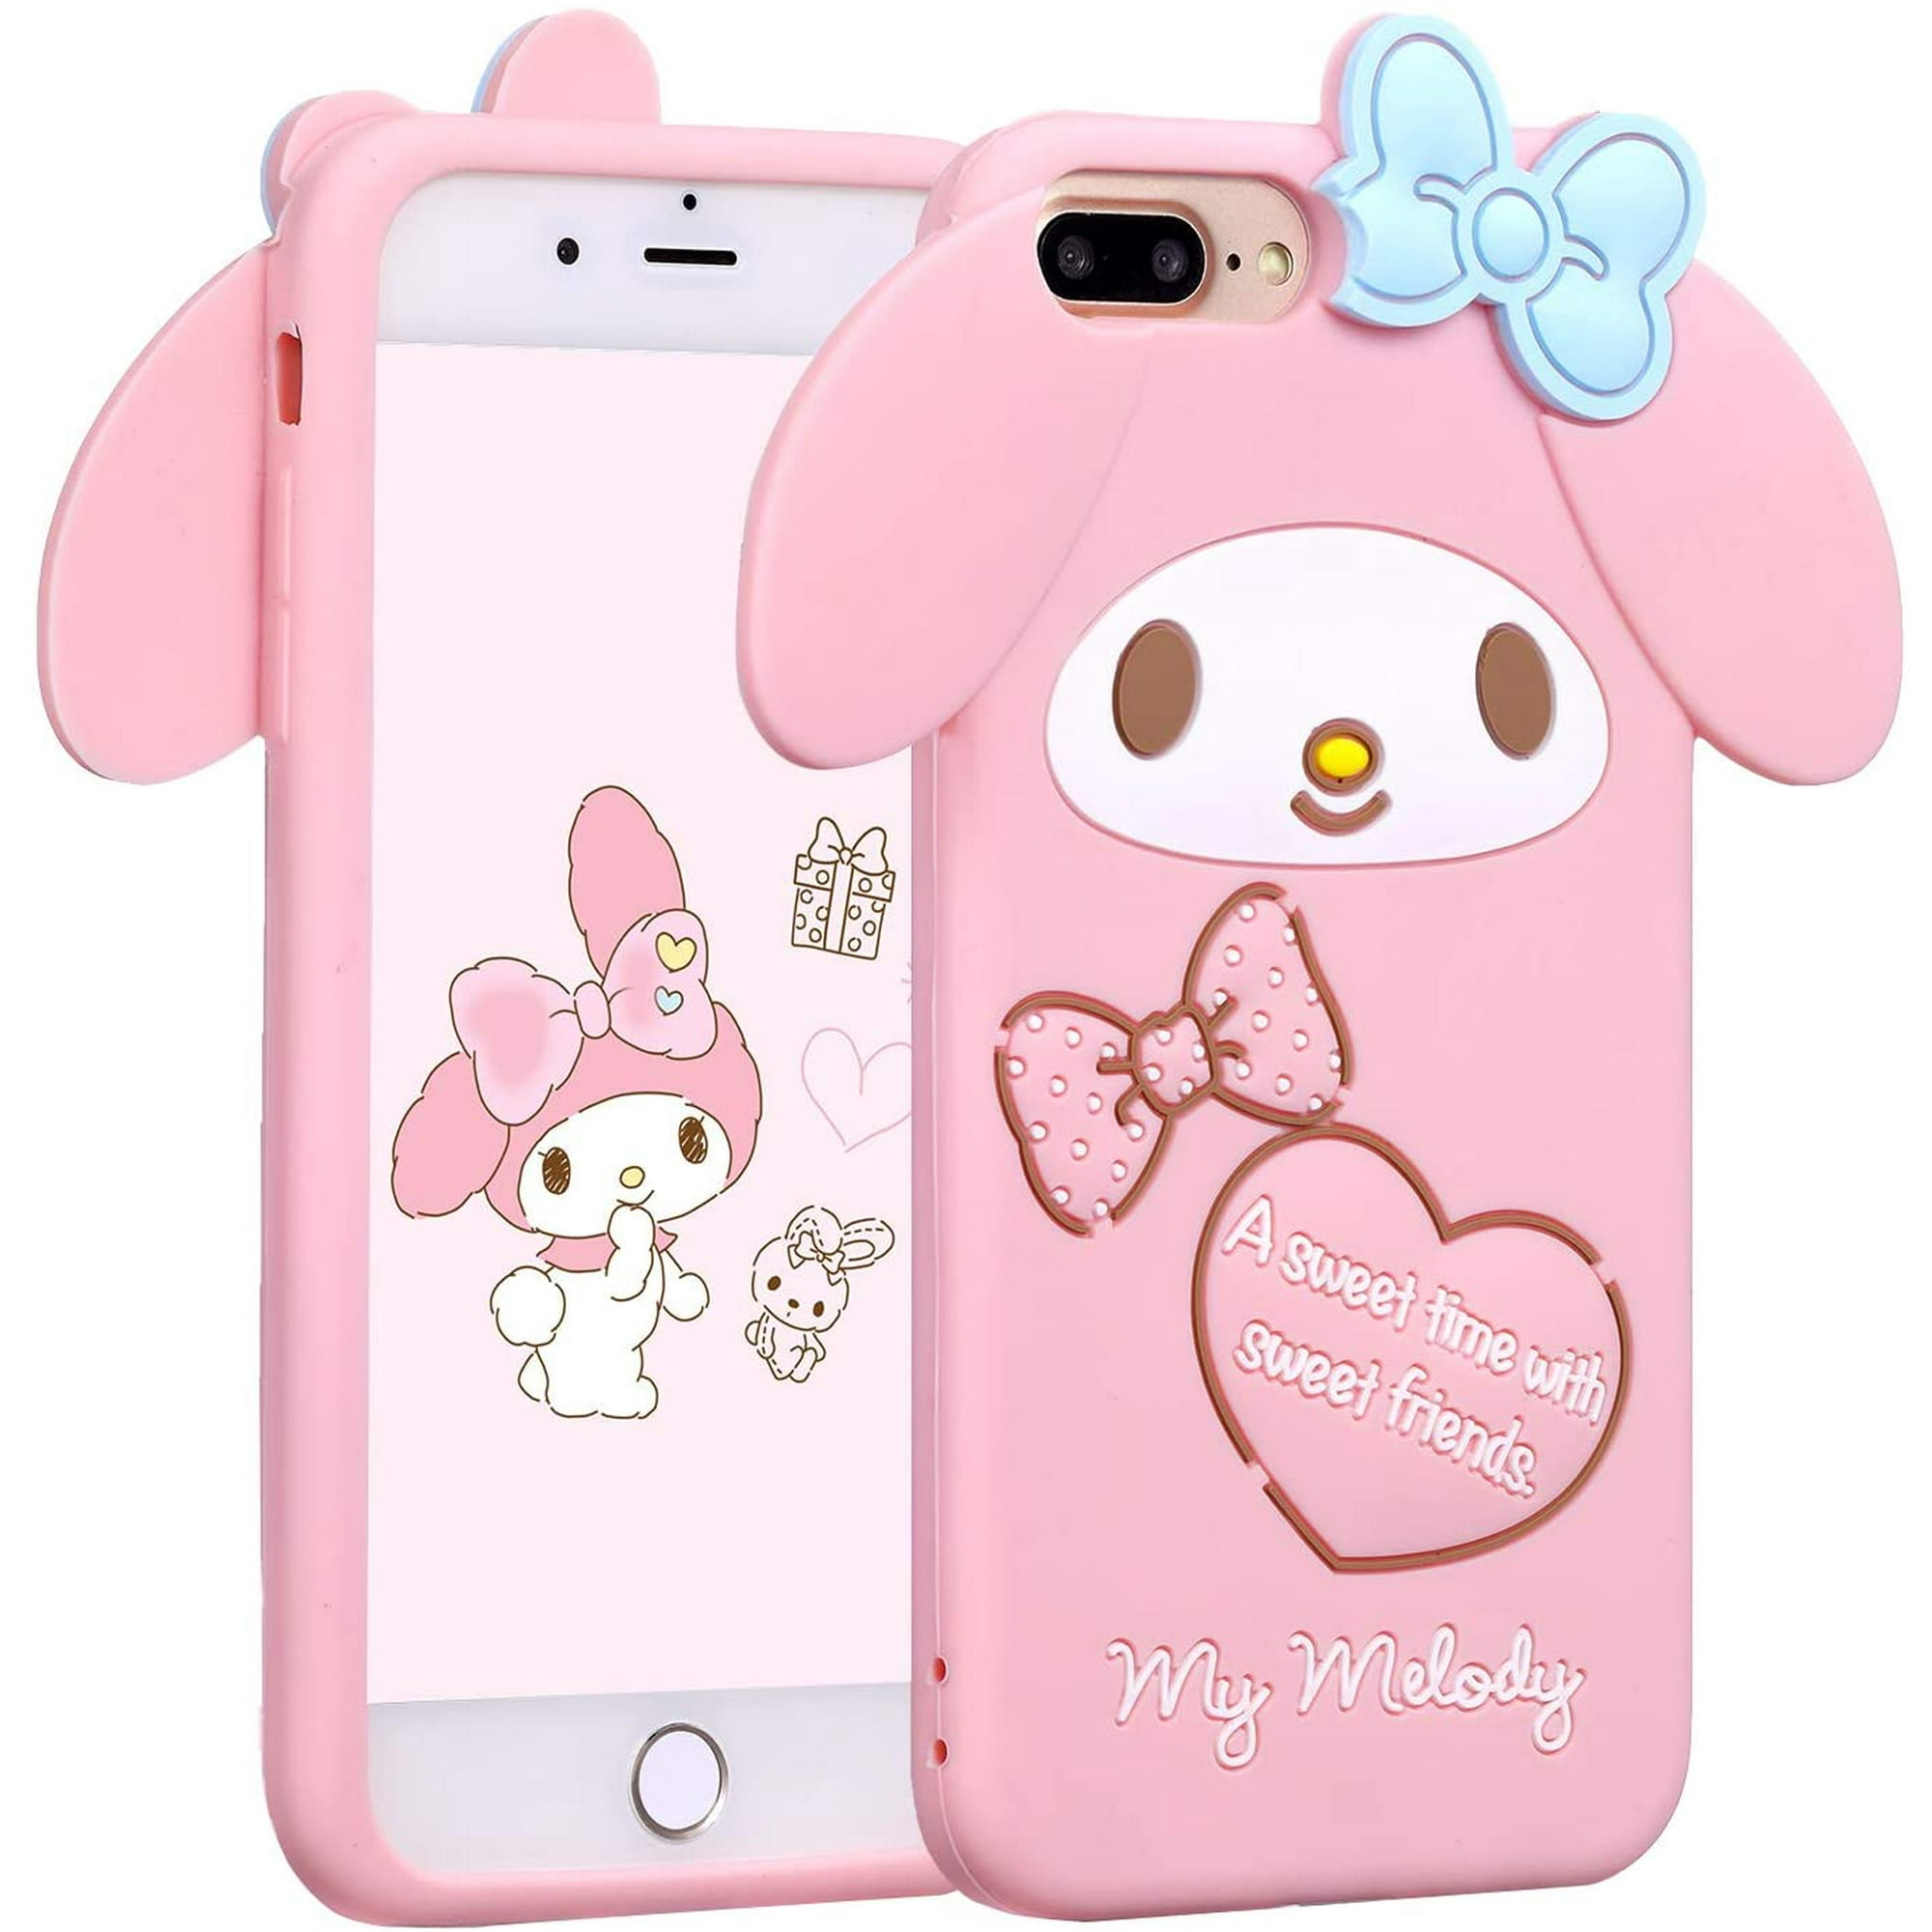 HTCM Case for iPhone 8 Plus/7 Plus/6 Plus,Cartoon Soft Silicone Cute 3D Fun  Cool Cover,Kawaii Unique Funny Kids Girls Teens Animal Character Skn  Shockproof Funny Pink Cases for iPhone 6SPlus Melody |